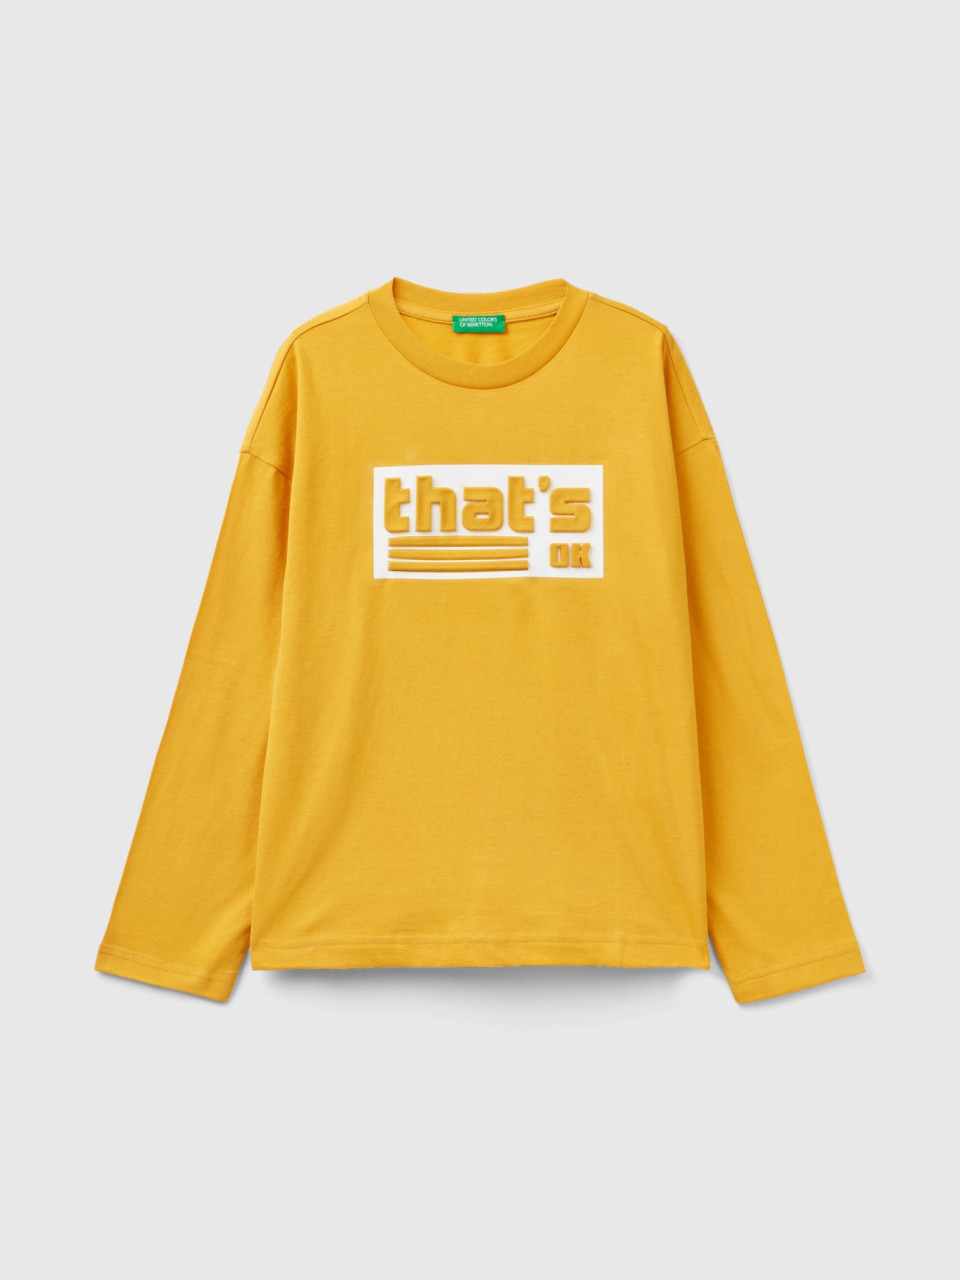 Benetton, T-shirt In Warm Cotton With Print, Yellow, Kids